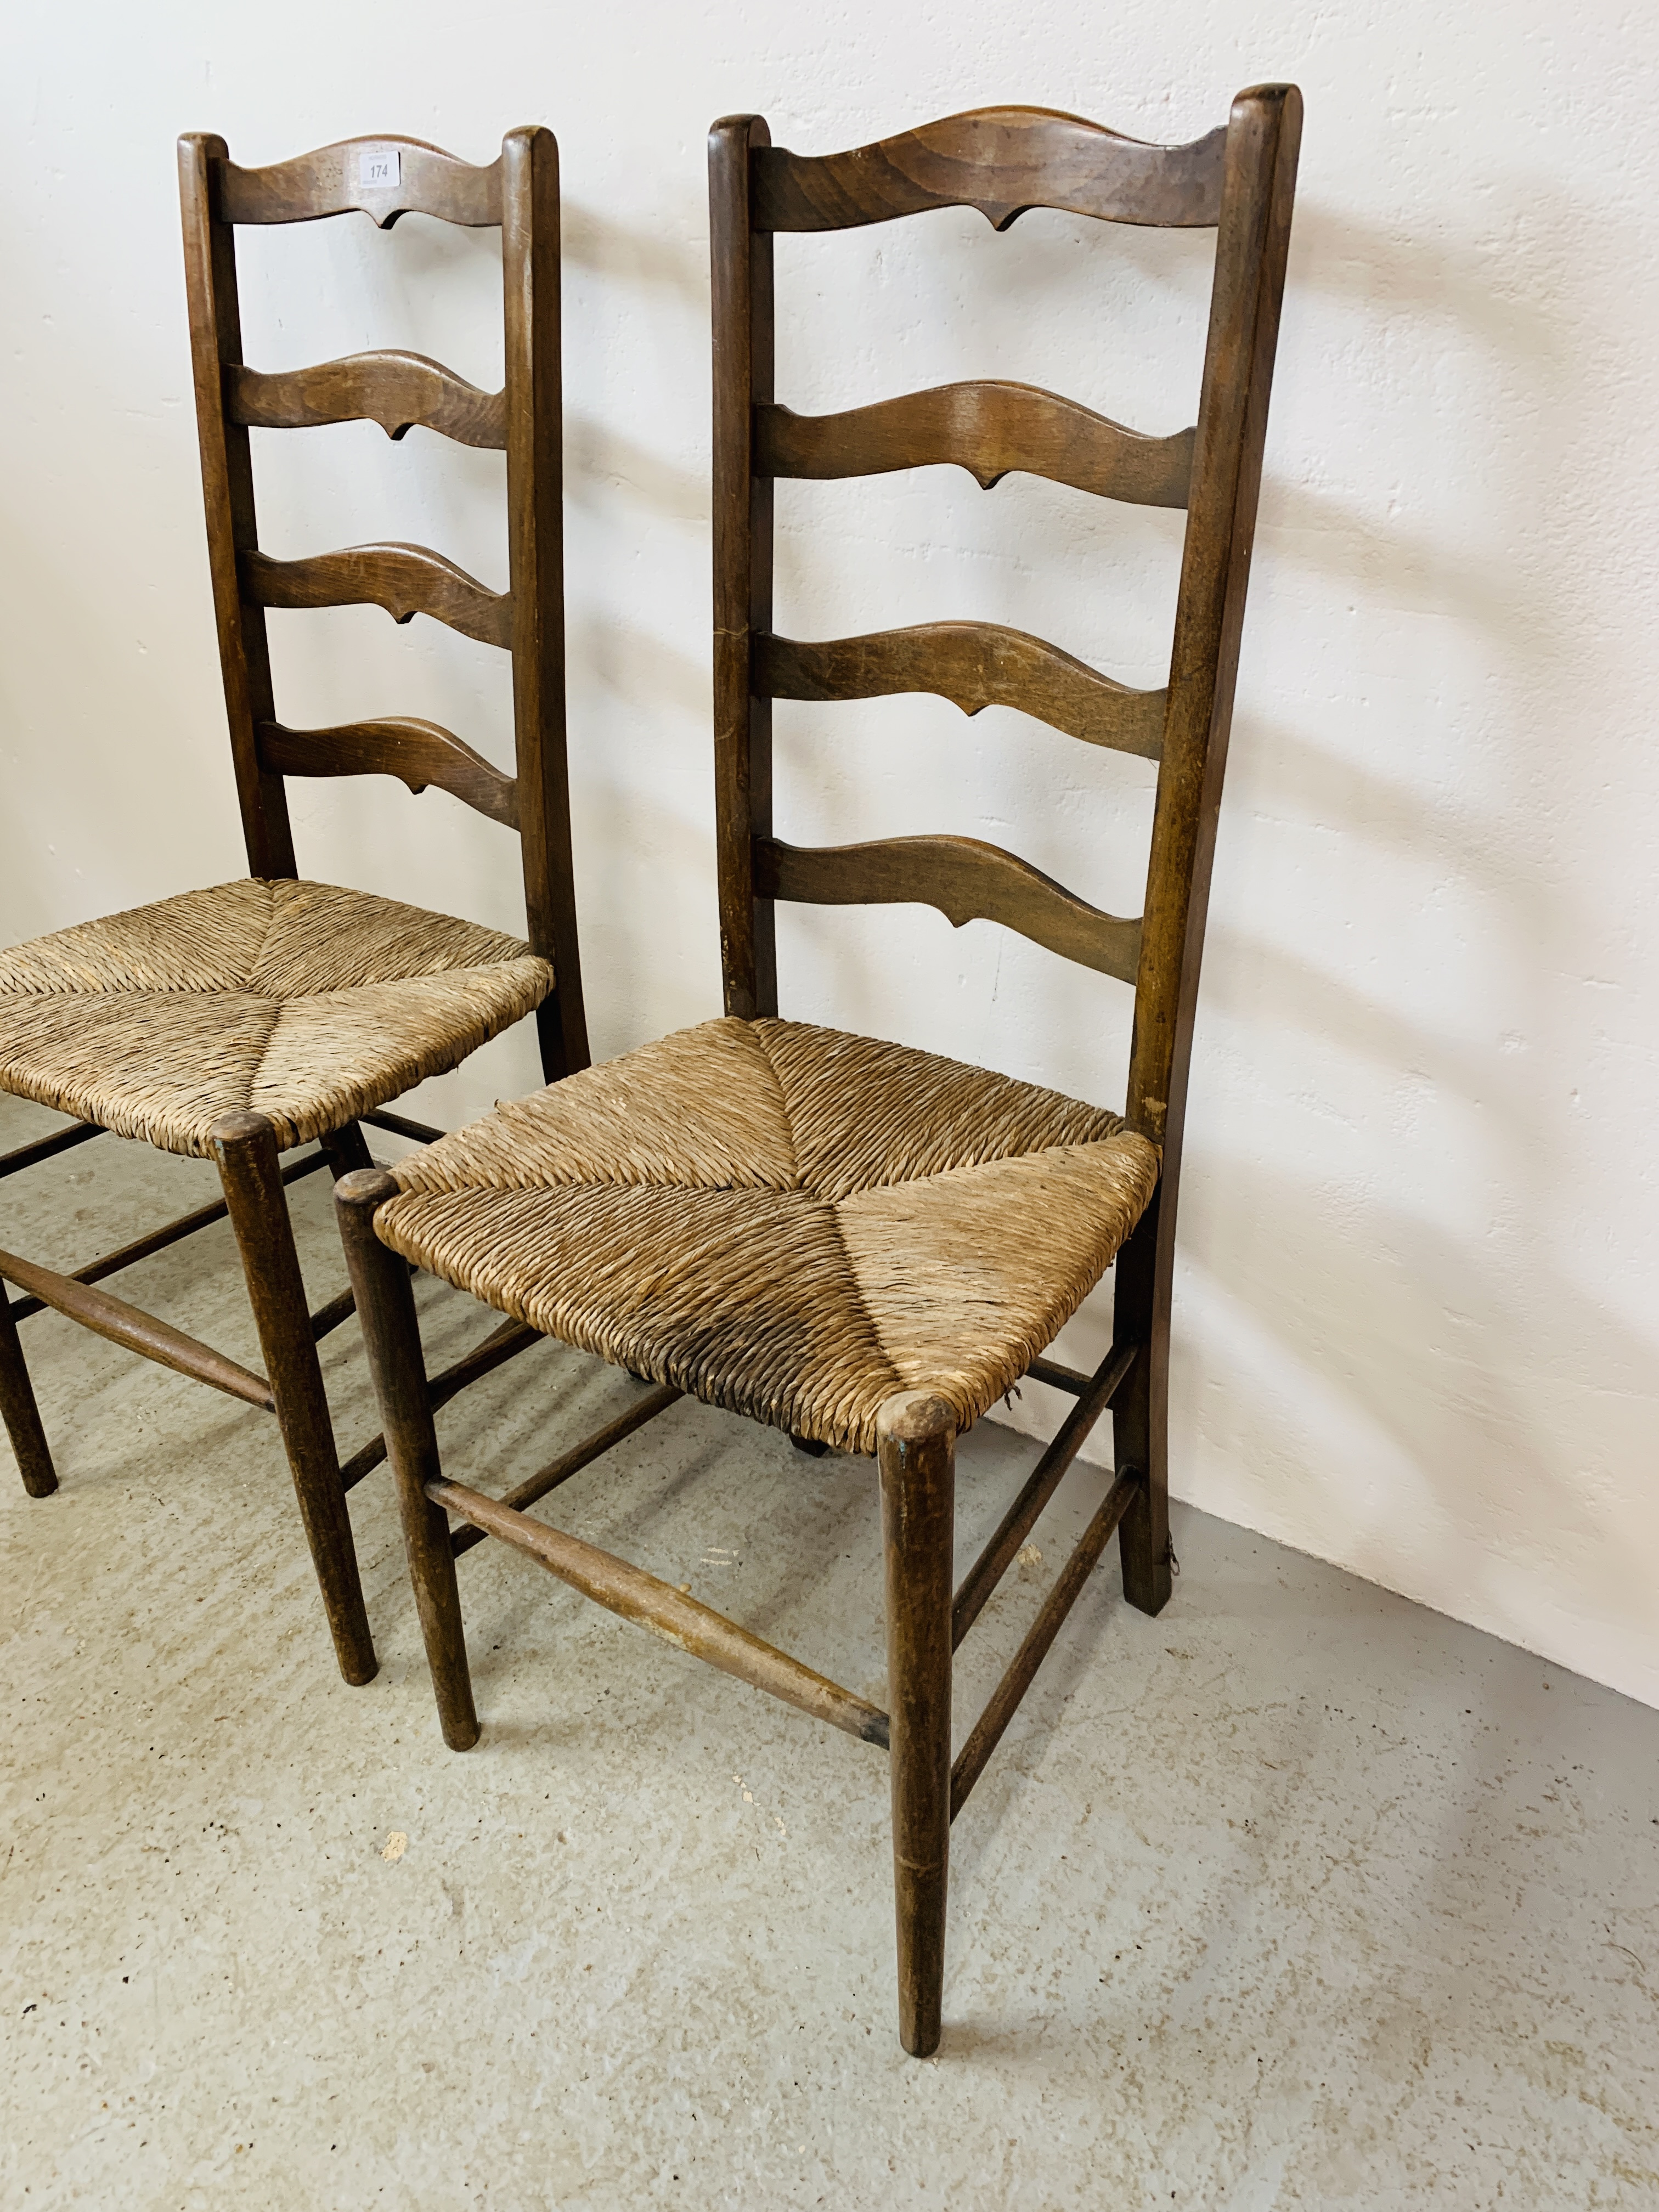 A PAIR OF ANTIQUE OAK LADDER BACK RUSH SEATED CHAIRS - Image 2 of 8